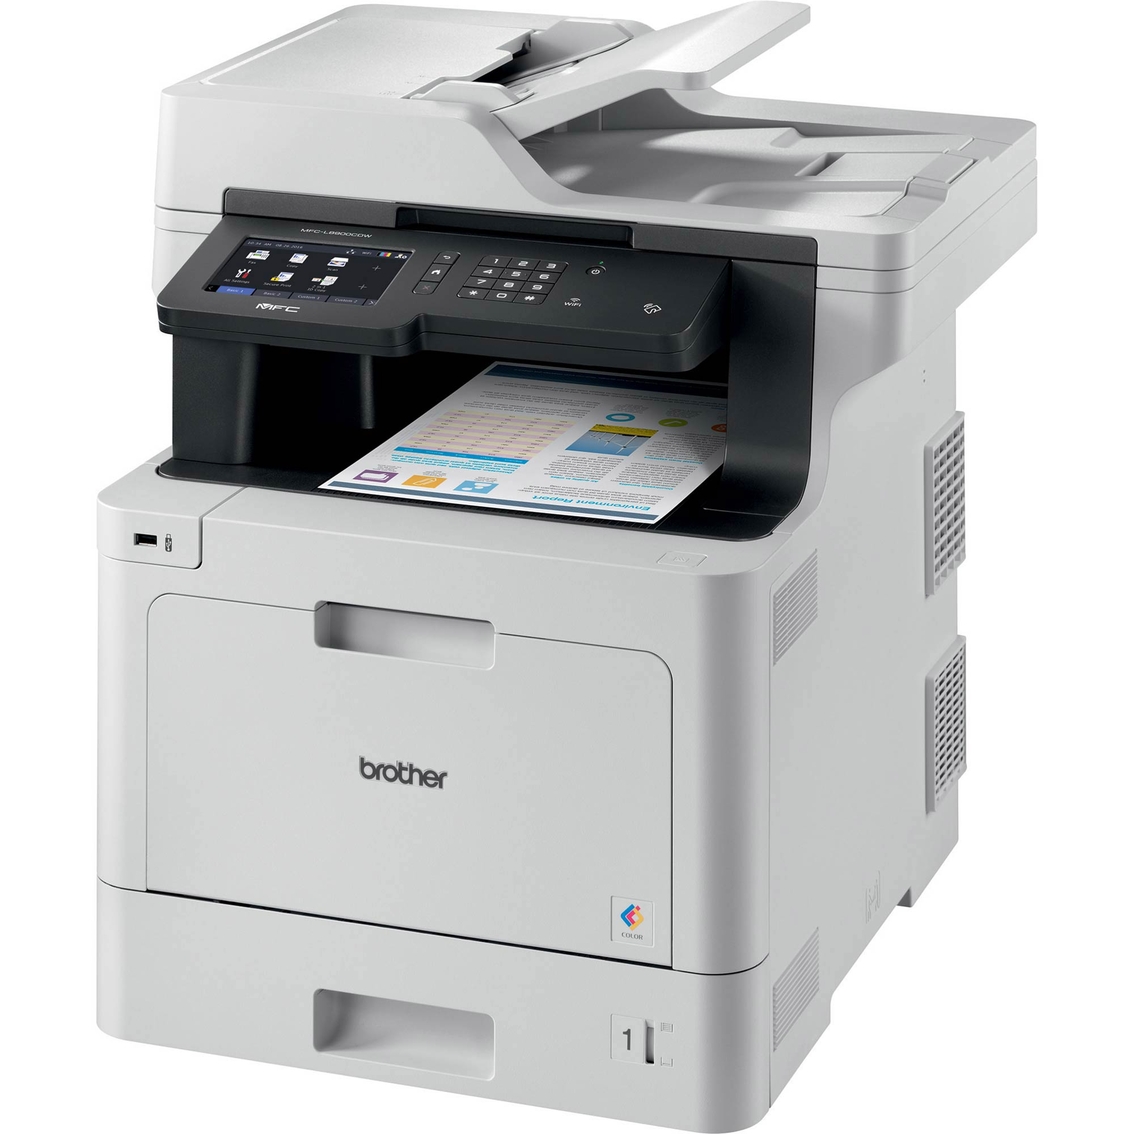 Brother MFCL8900CDW Color Laser All in One Printer - Image 2 of 4